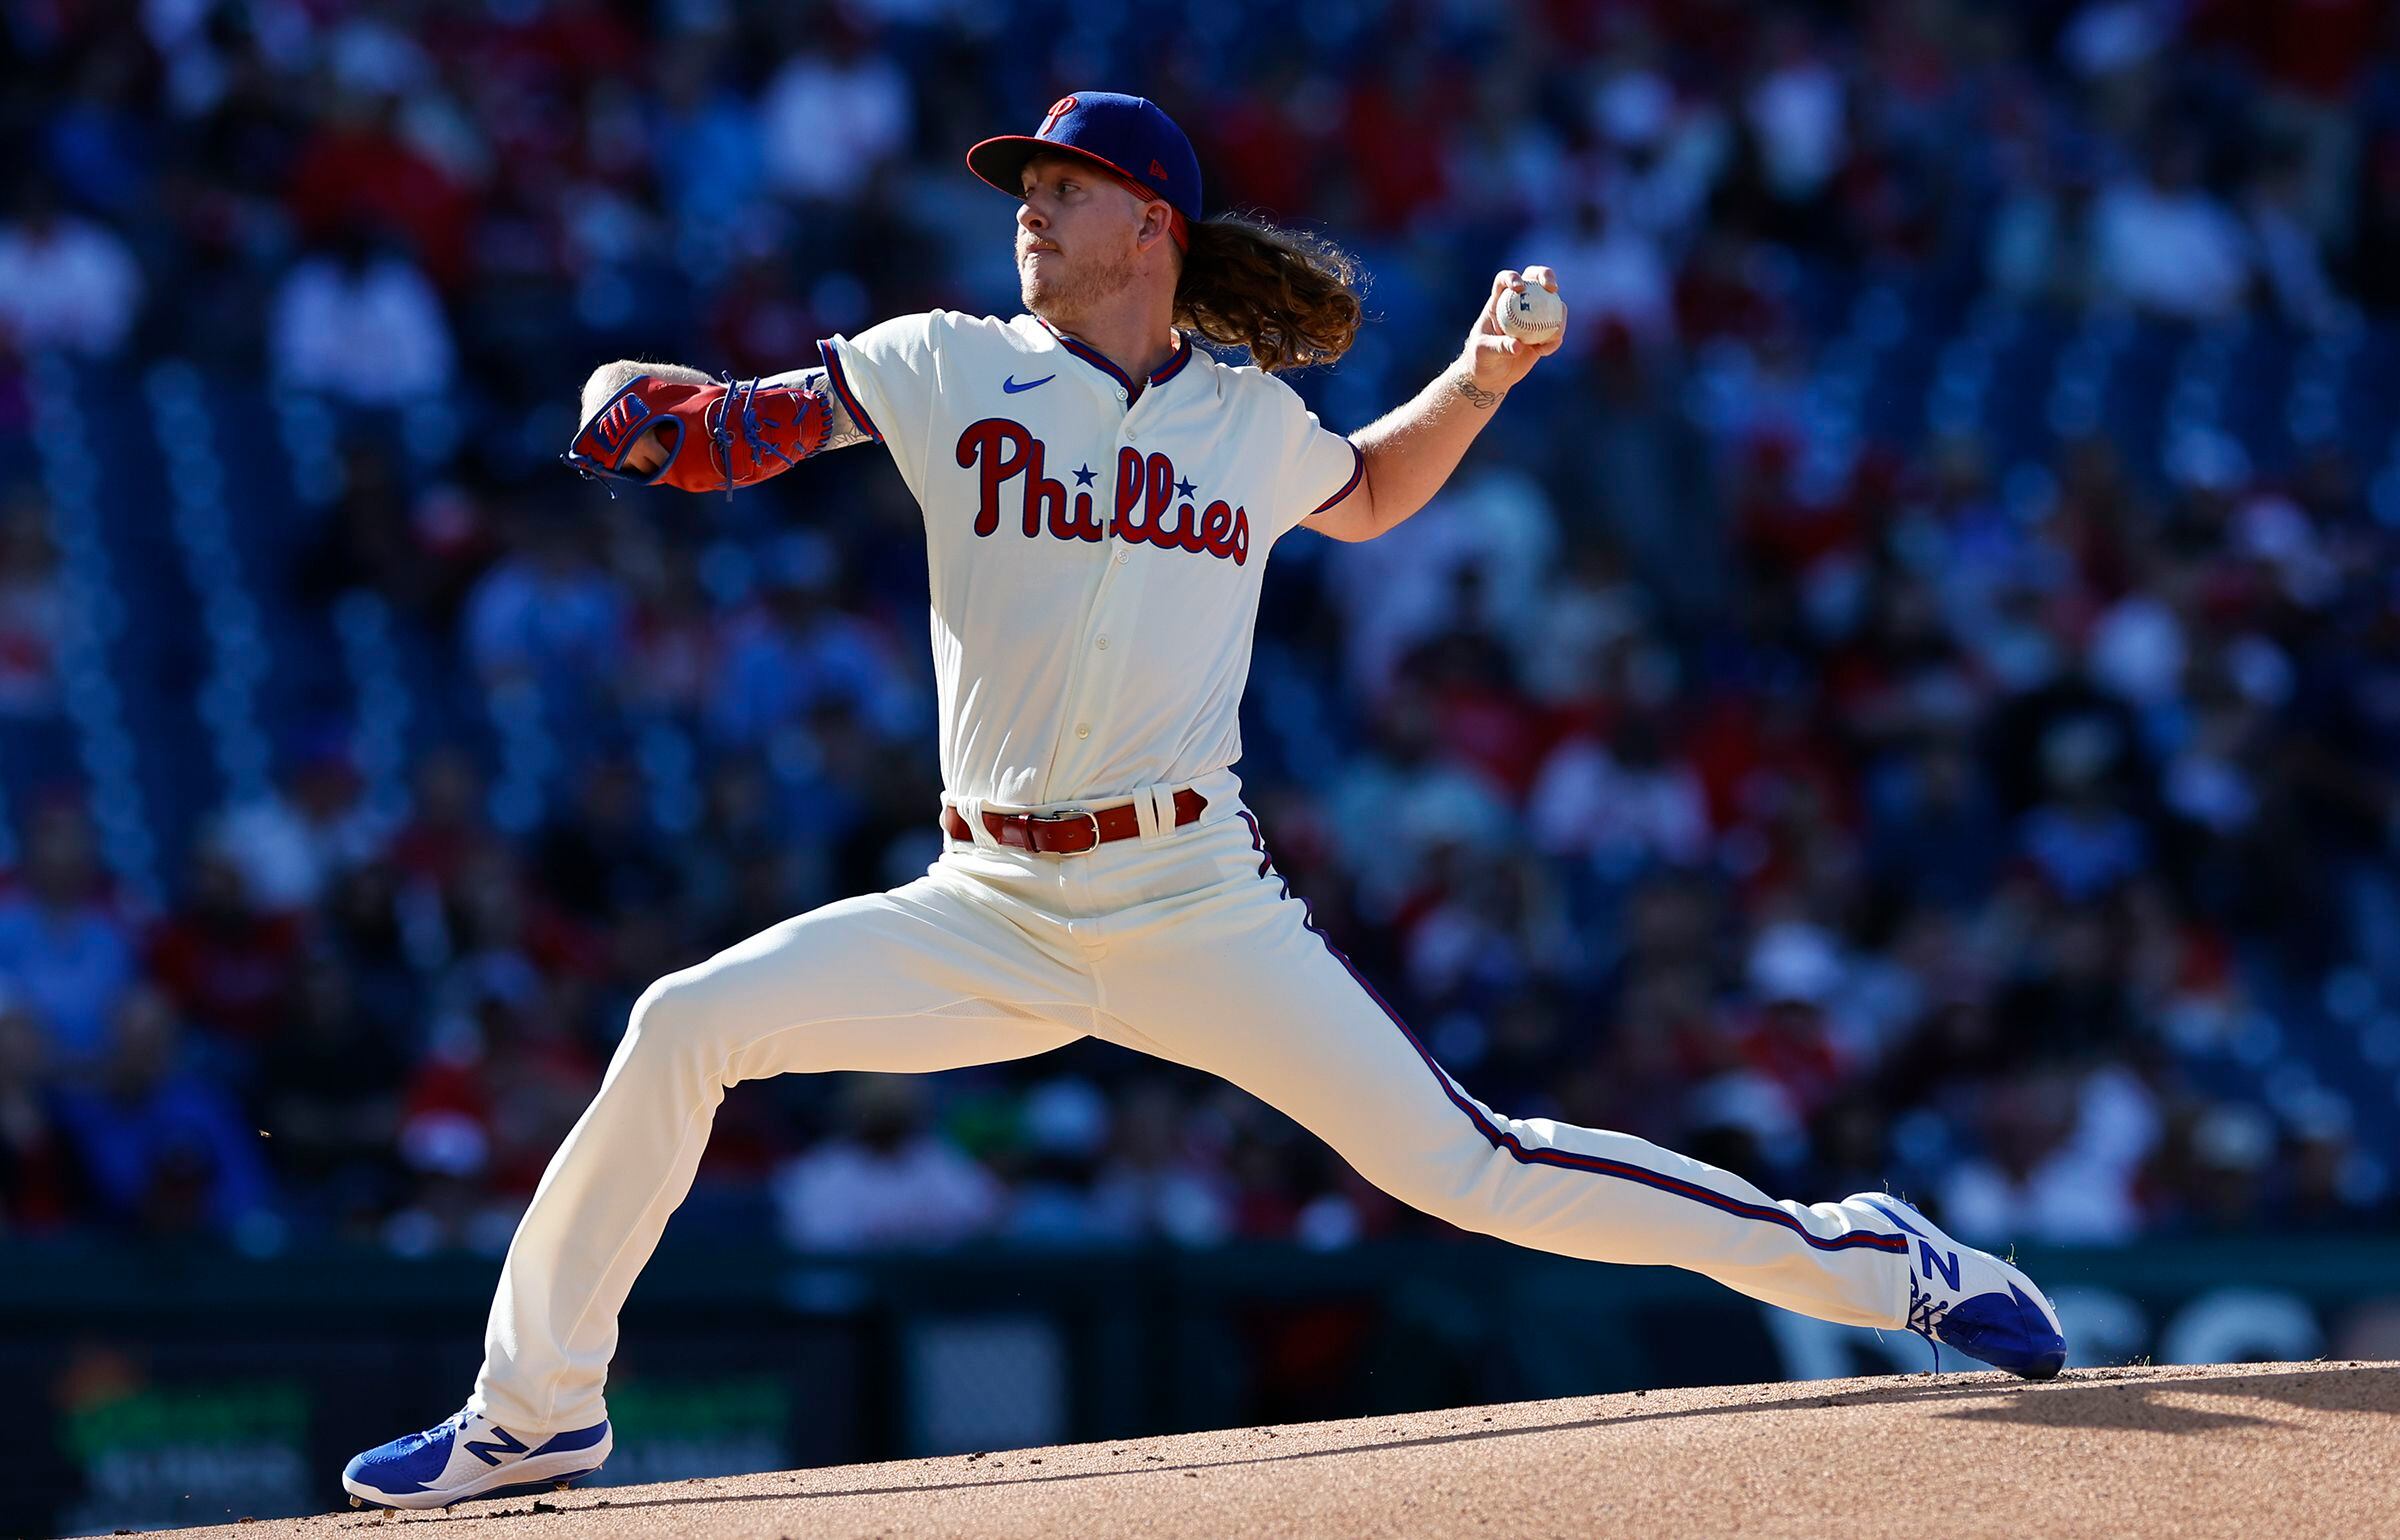 Sizemore powers Phillies to sweep over Nats